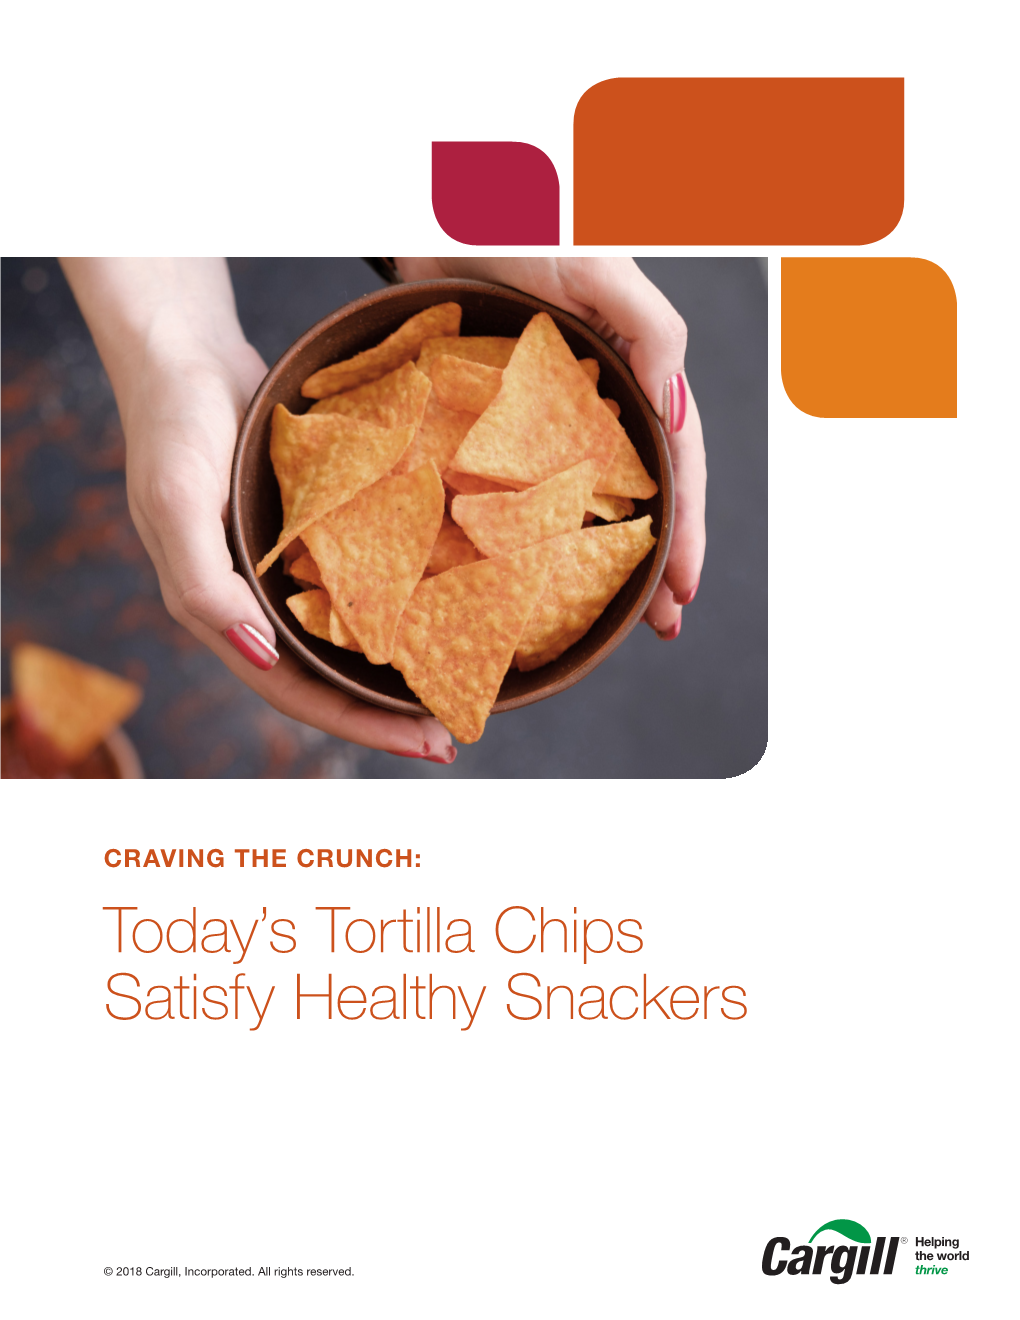 Today's Tortilla Chips Satisfy Healthy Snackers